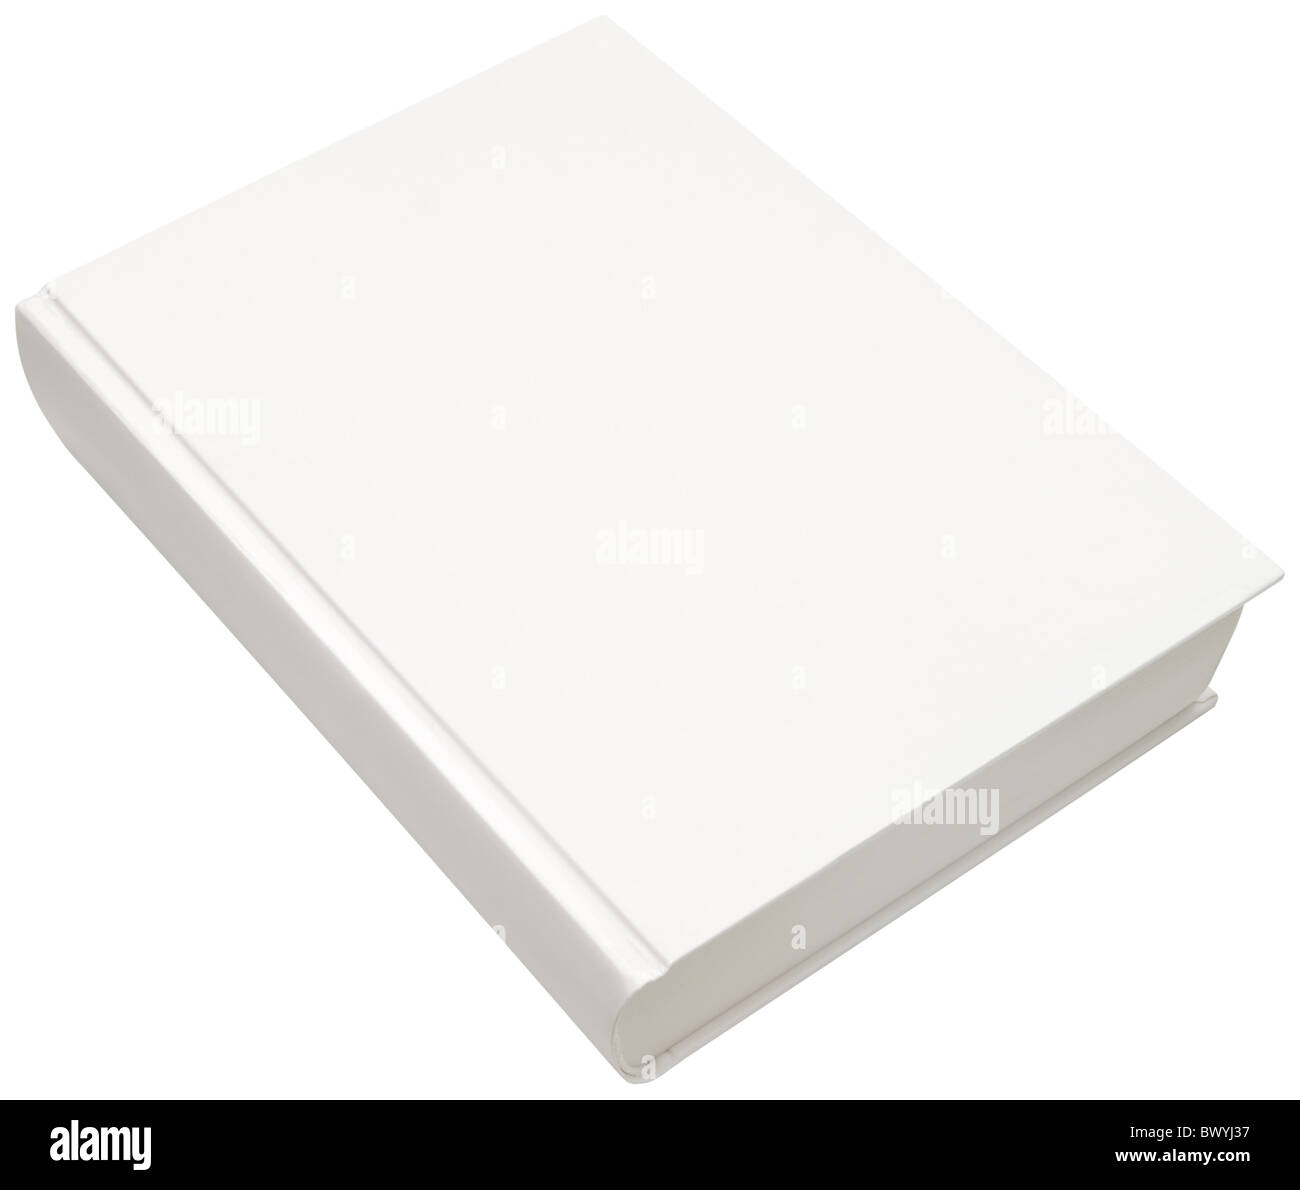 Cutout of Empty white model of hard book cover isolated with clipping path Stock Photo